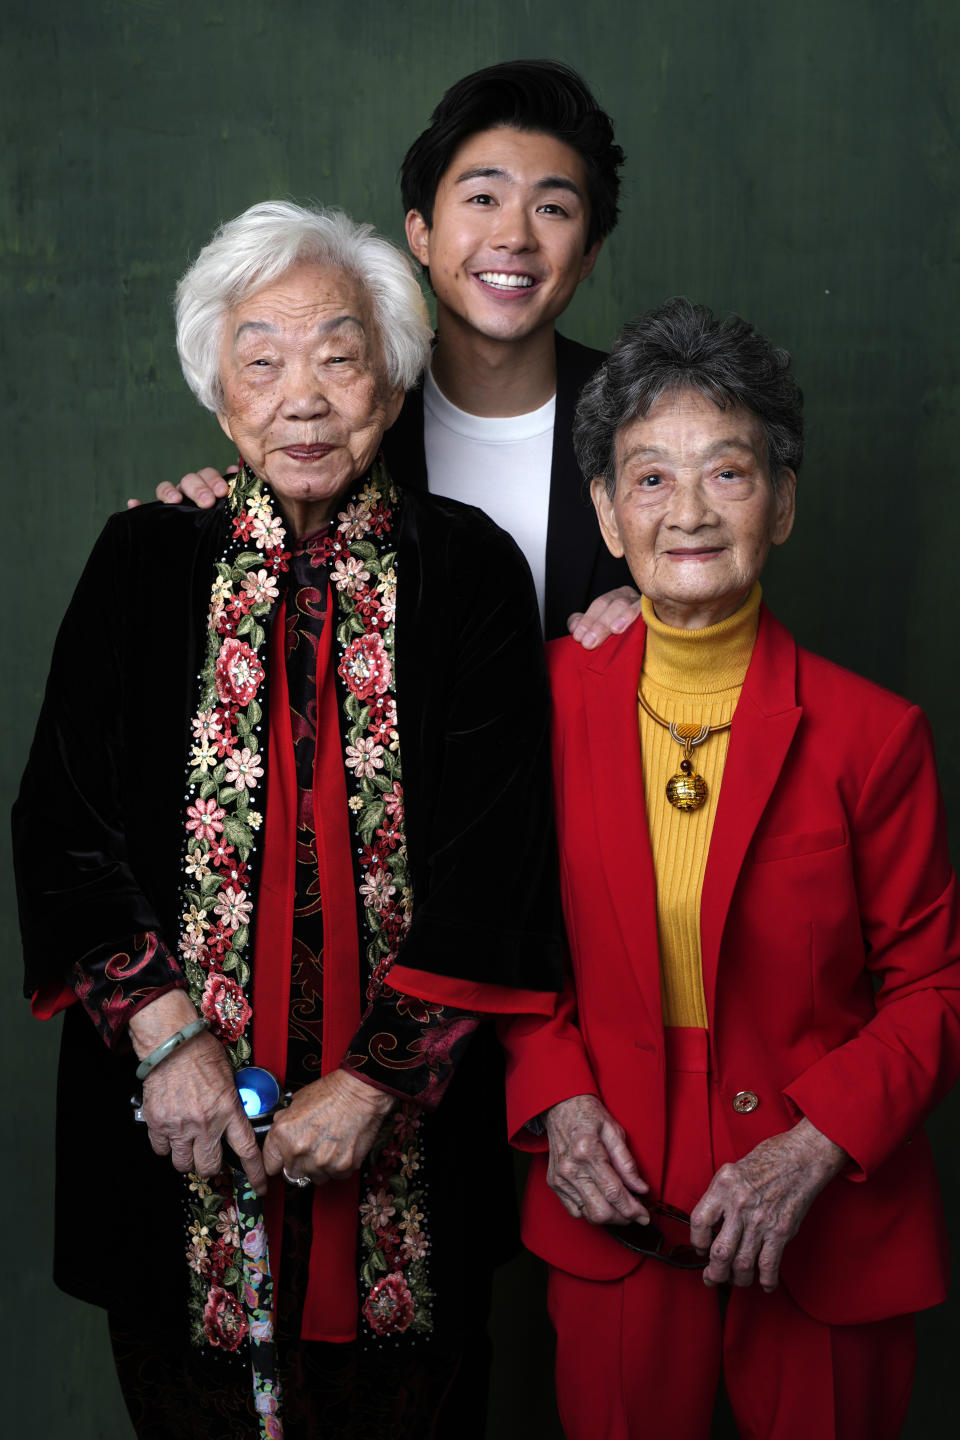 Yi Yan Fuei, from left, Sean Wang, and Zhang Li Hua pose for a portrait during the 96th Academy Awards Oscar nominees luncheon on Monday, Feb. 12, 2024, at the Beverly Hilton Hotel in Beverly Hills, Calif. (AP Photo/Chris Pizzello)